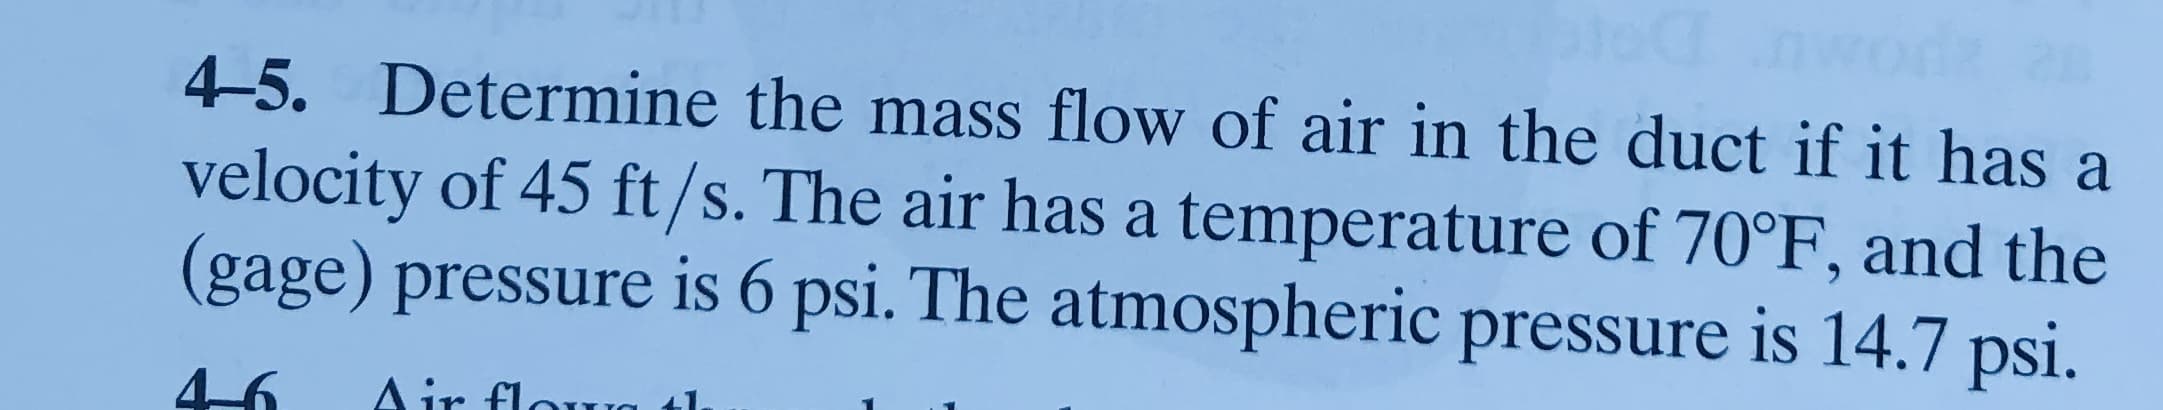 4-5. Determine the mass flow of air in the duct if it has a
velocity of 45 ft/s. The air has a temperature of 70°F, and the
(gage) pressure is 6 psi. The atmospheric pressure is 14.7 psi.
Air flora
46
